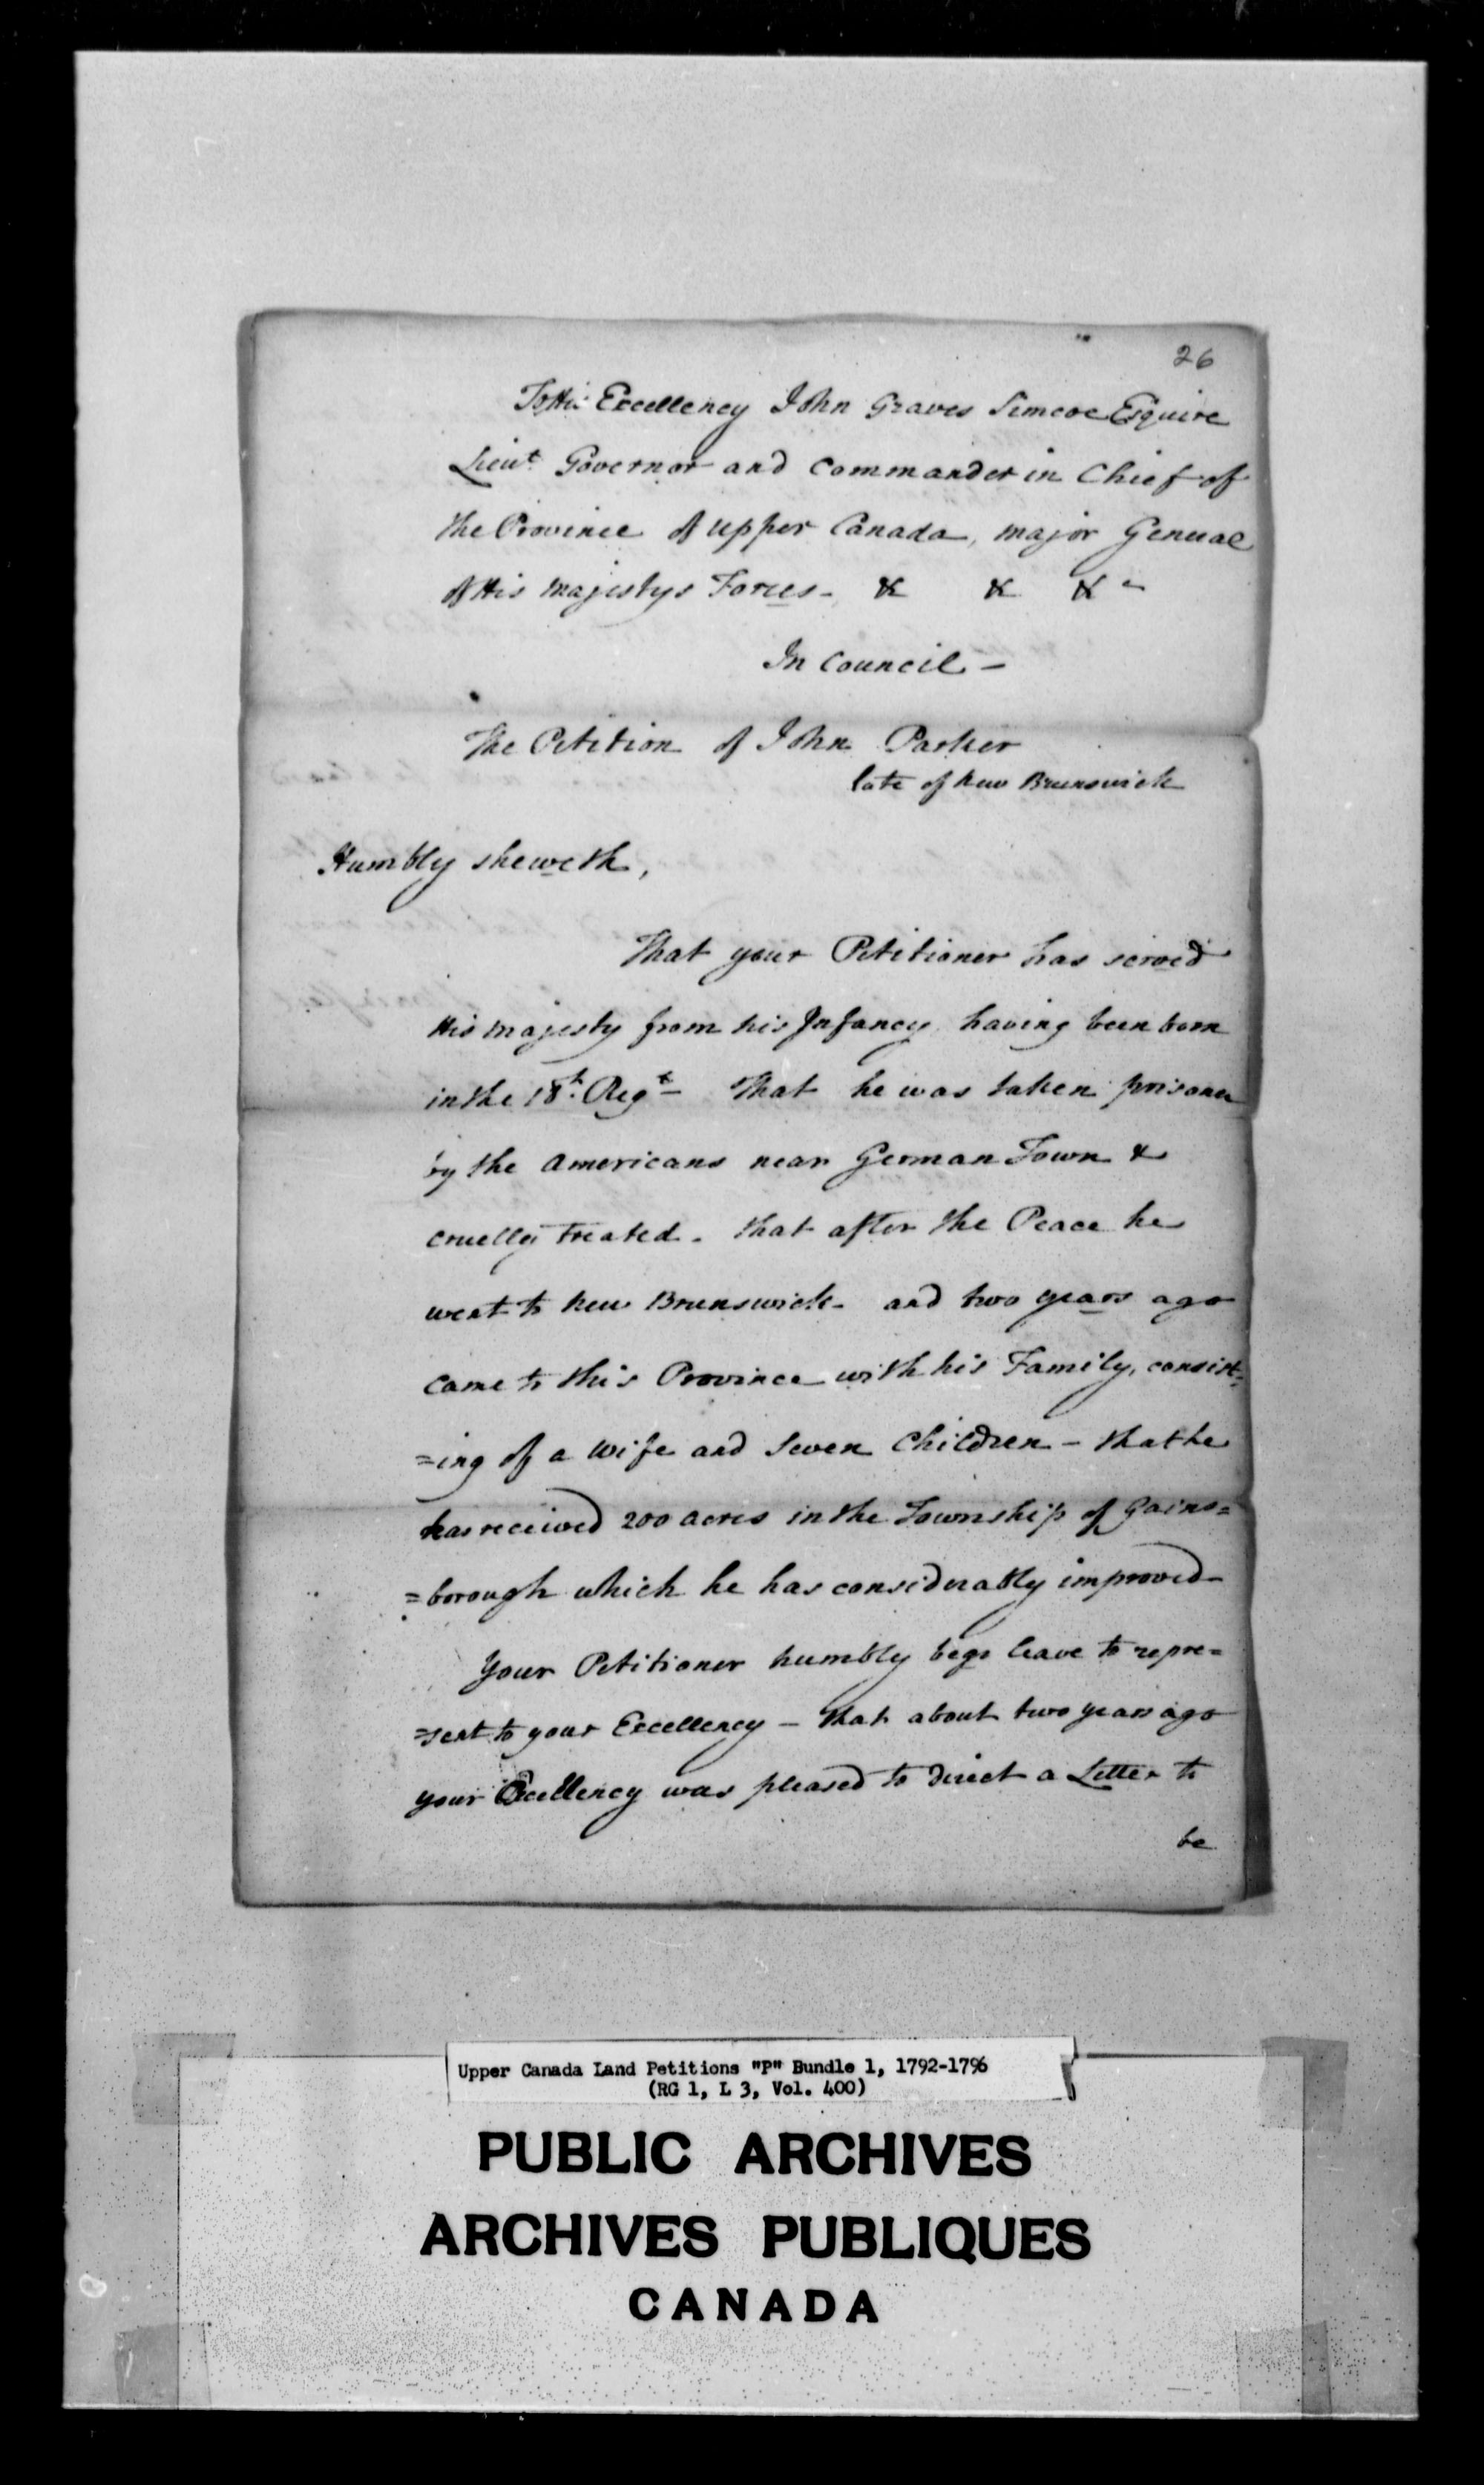 Title: Upper Canada Land Petitions (1763-1865) - Mikan Number: 205131 - Microform: c-2488